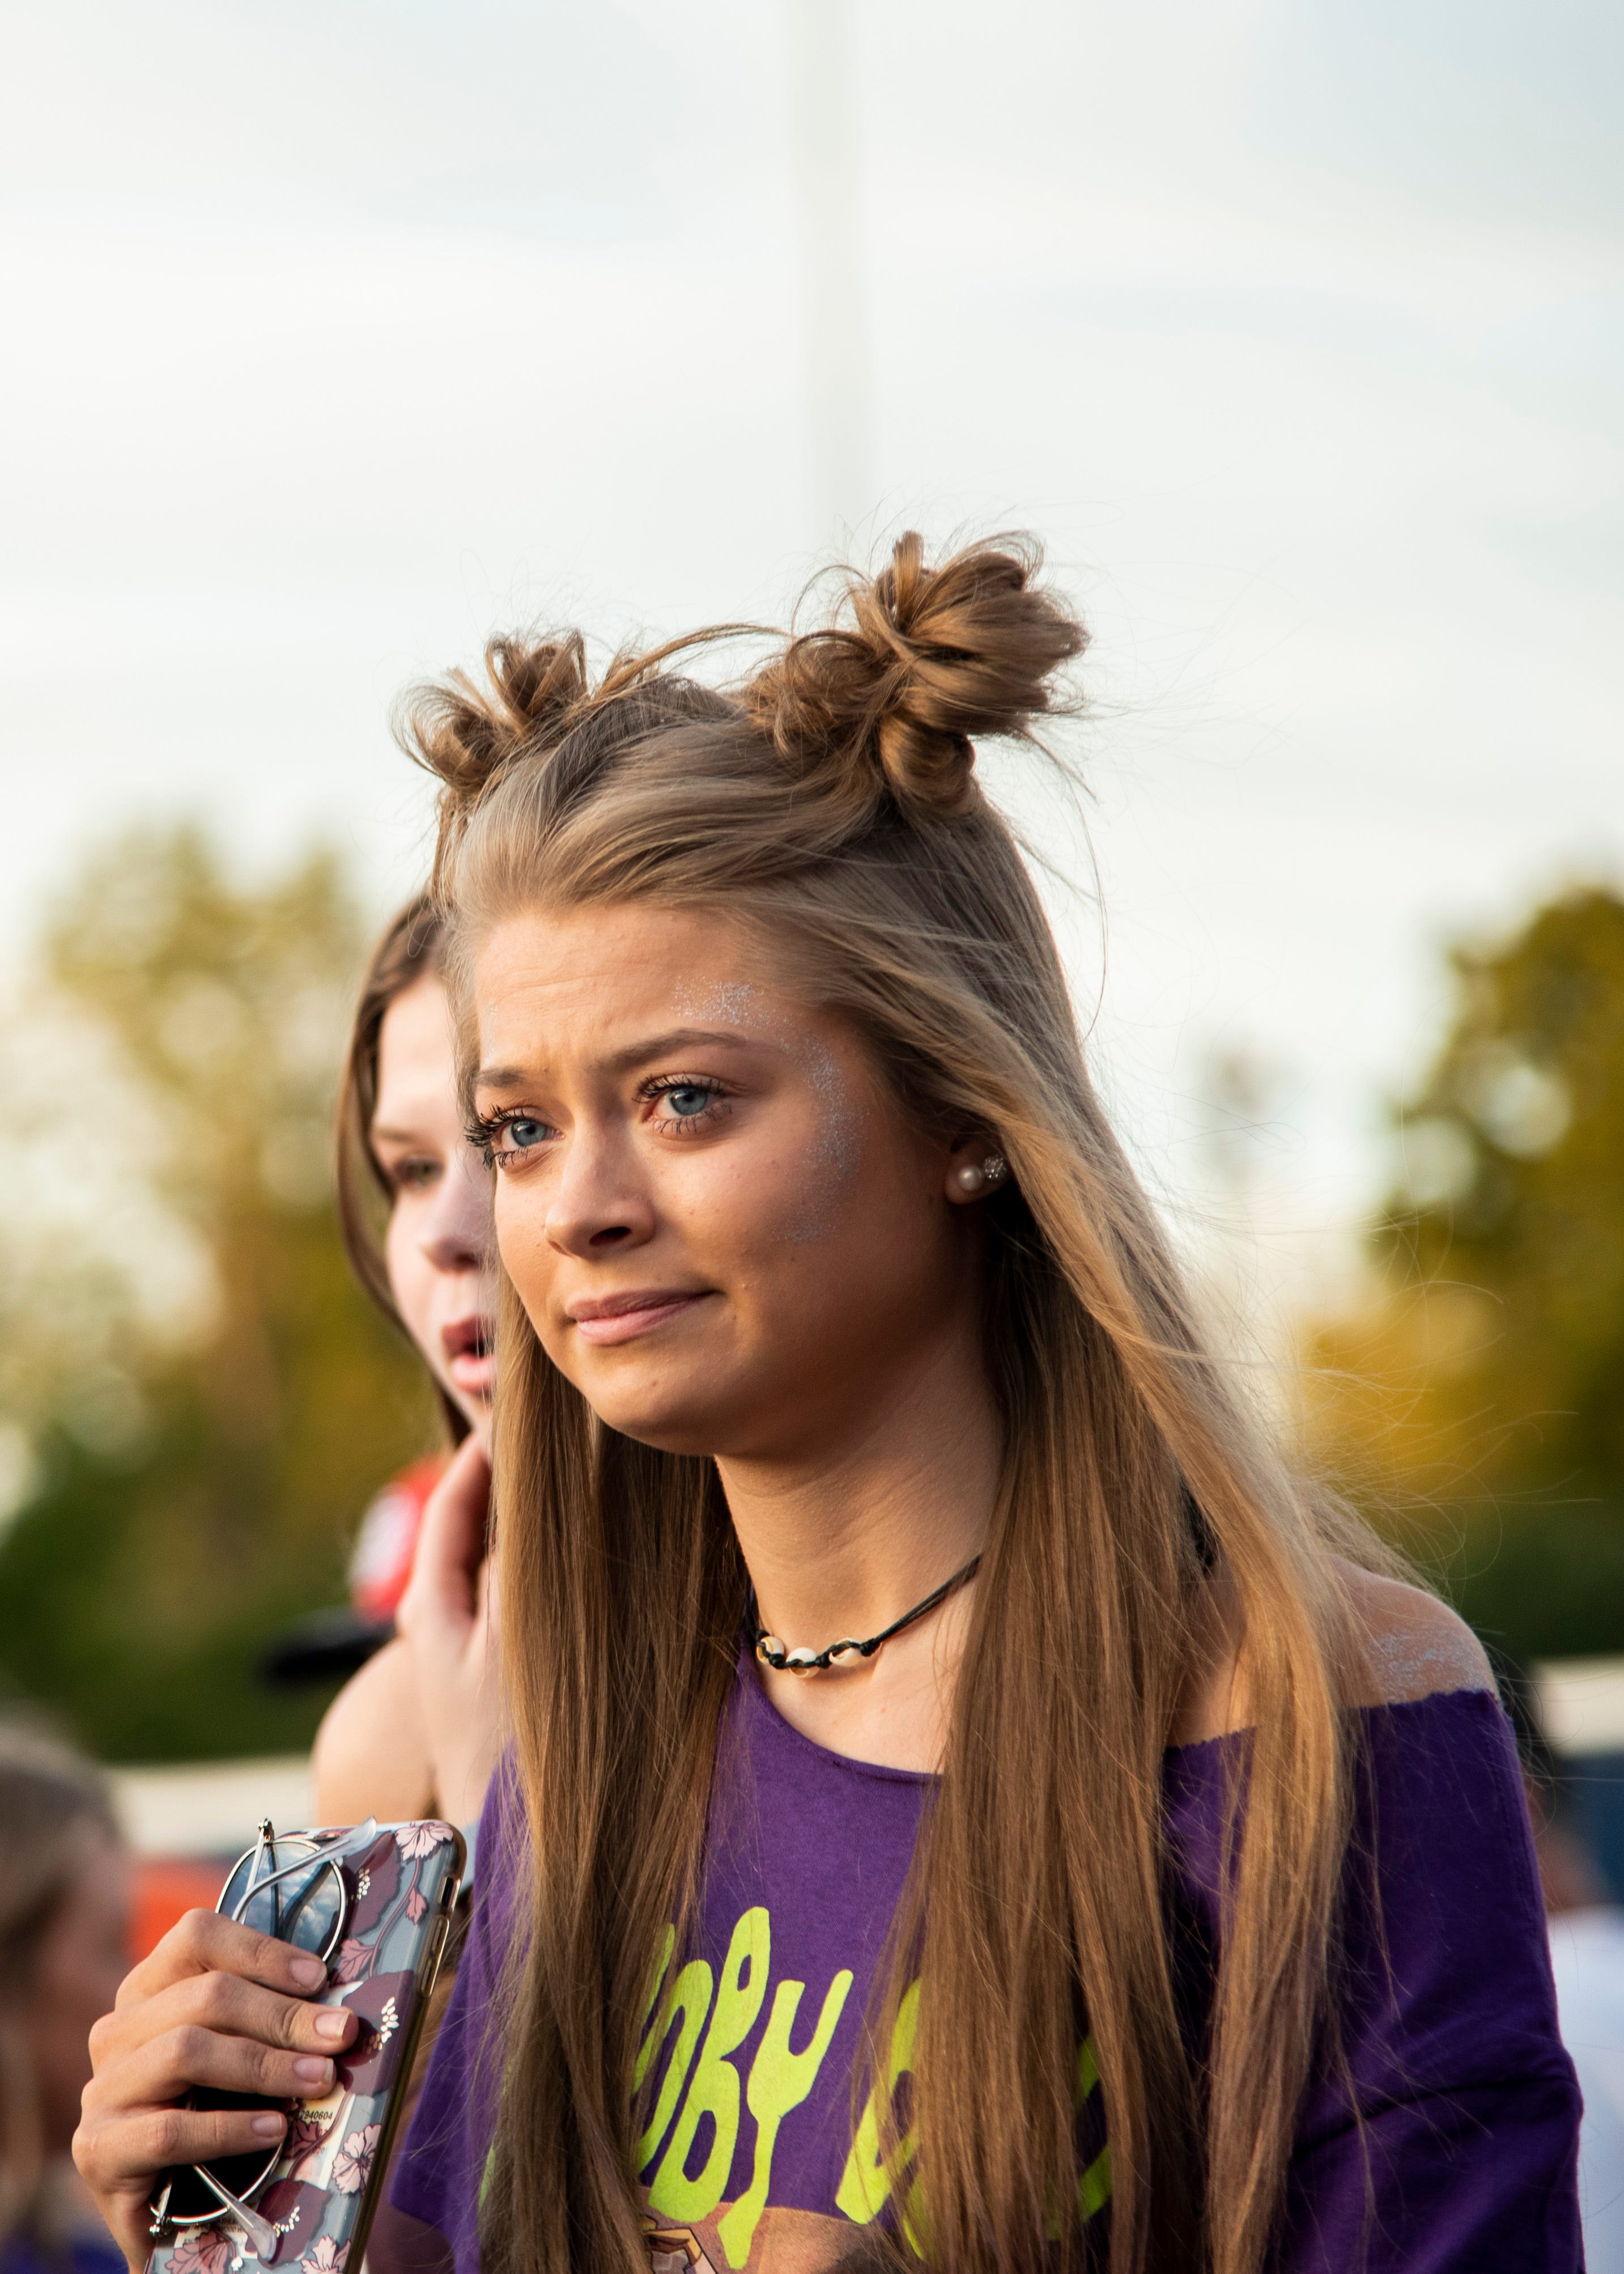 A Halls student walks to the stadium before the Halls and Central high school football game on Friday, October 4, 2019 at Halls High School.